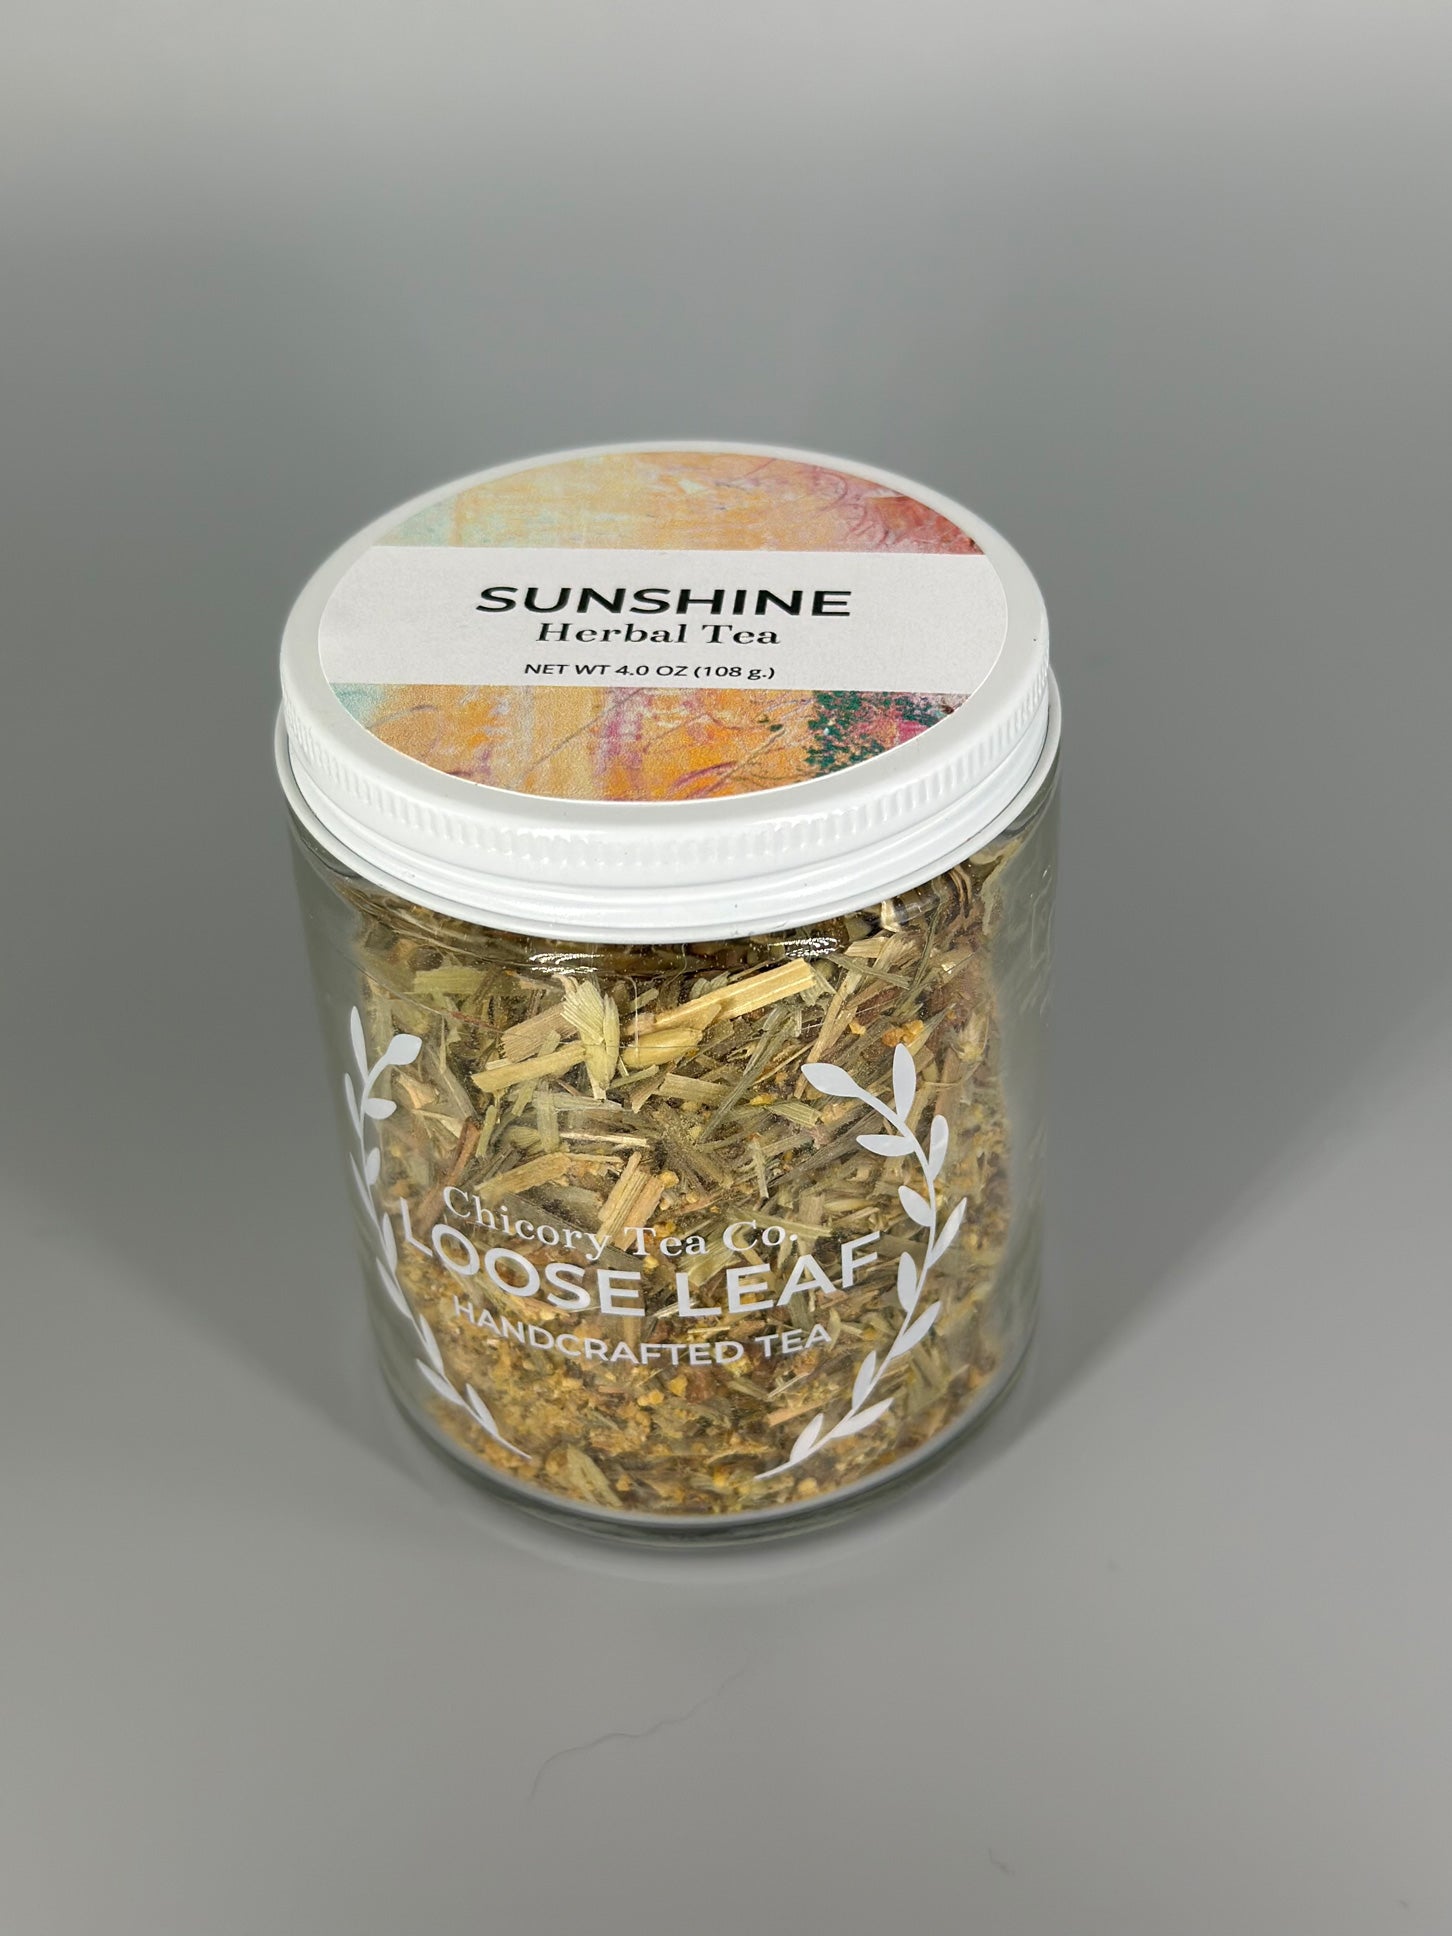 Chicory Tea Co.'s Sunshine Herbal Tea with a view from the front in the jar